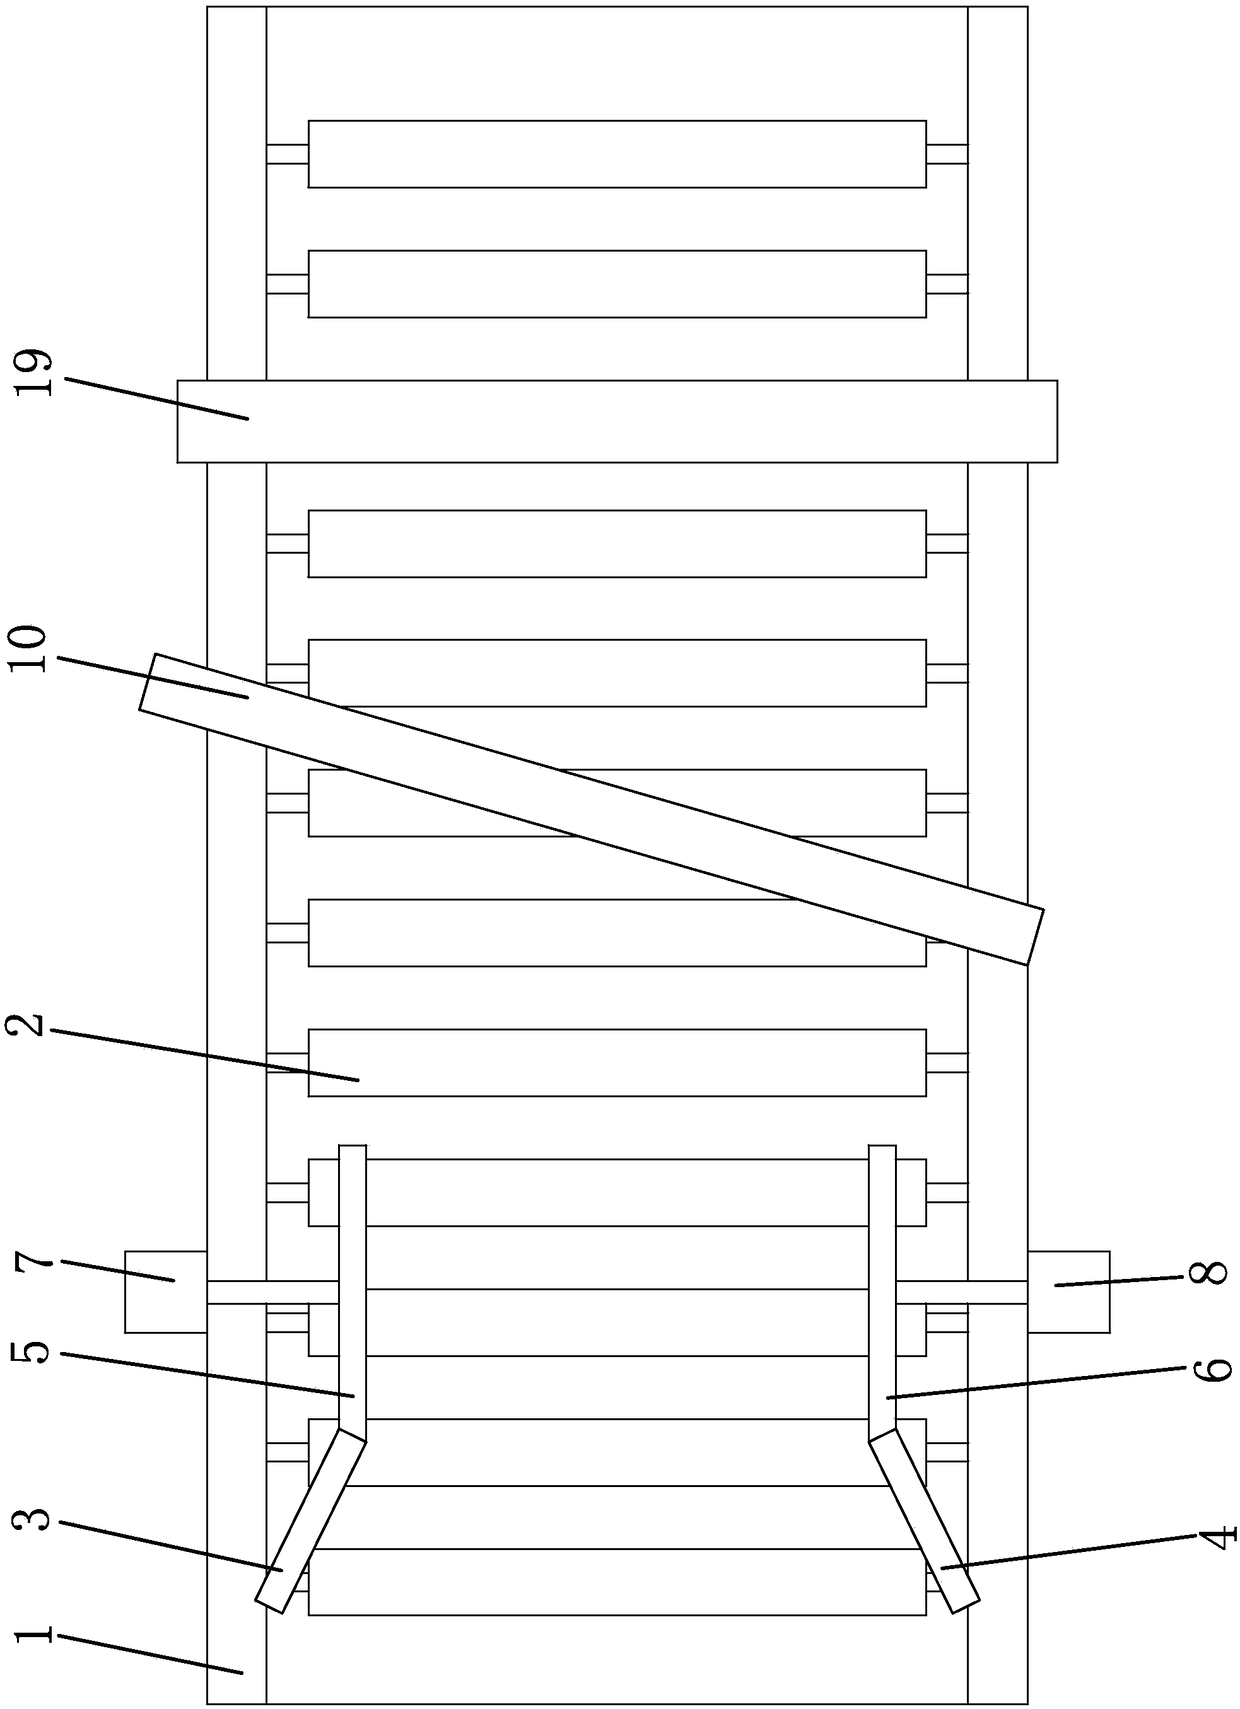 Conveying mechanism of plate cutting device